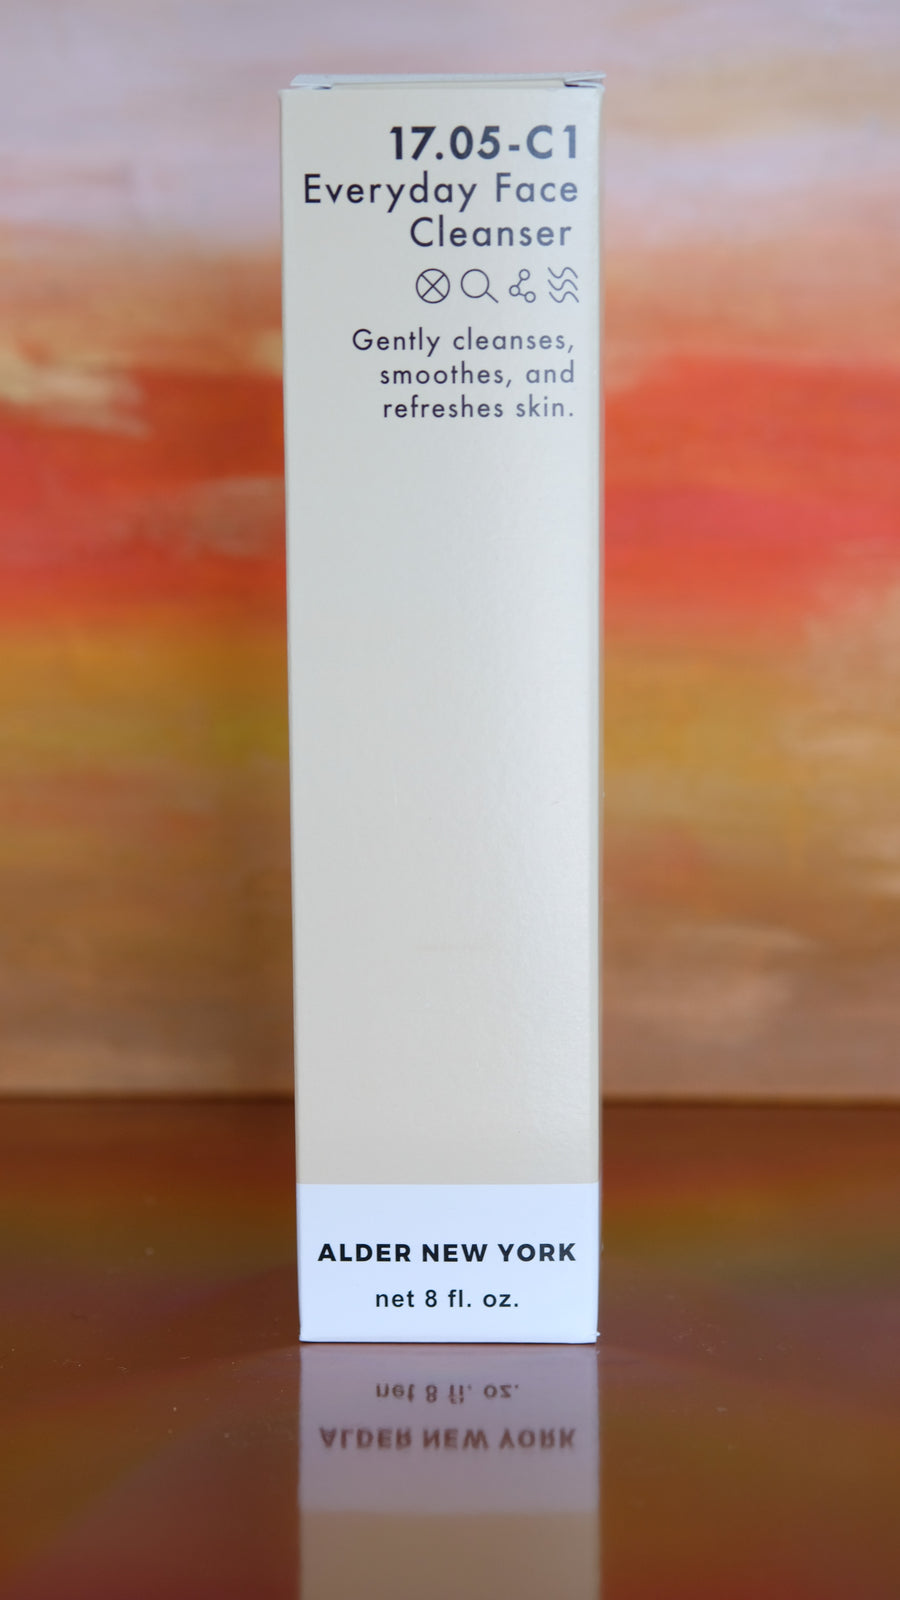 Everyday Face Cleanser by Alder New York